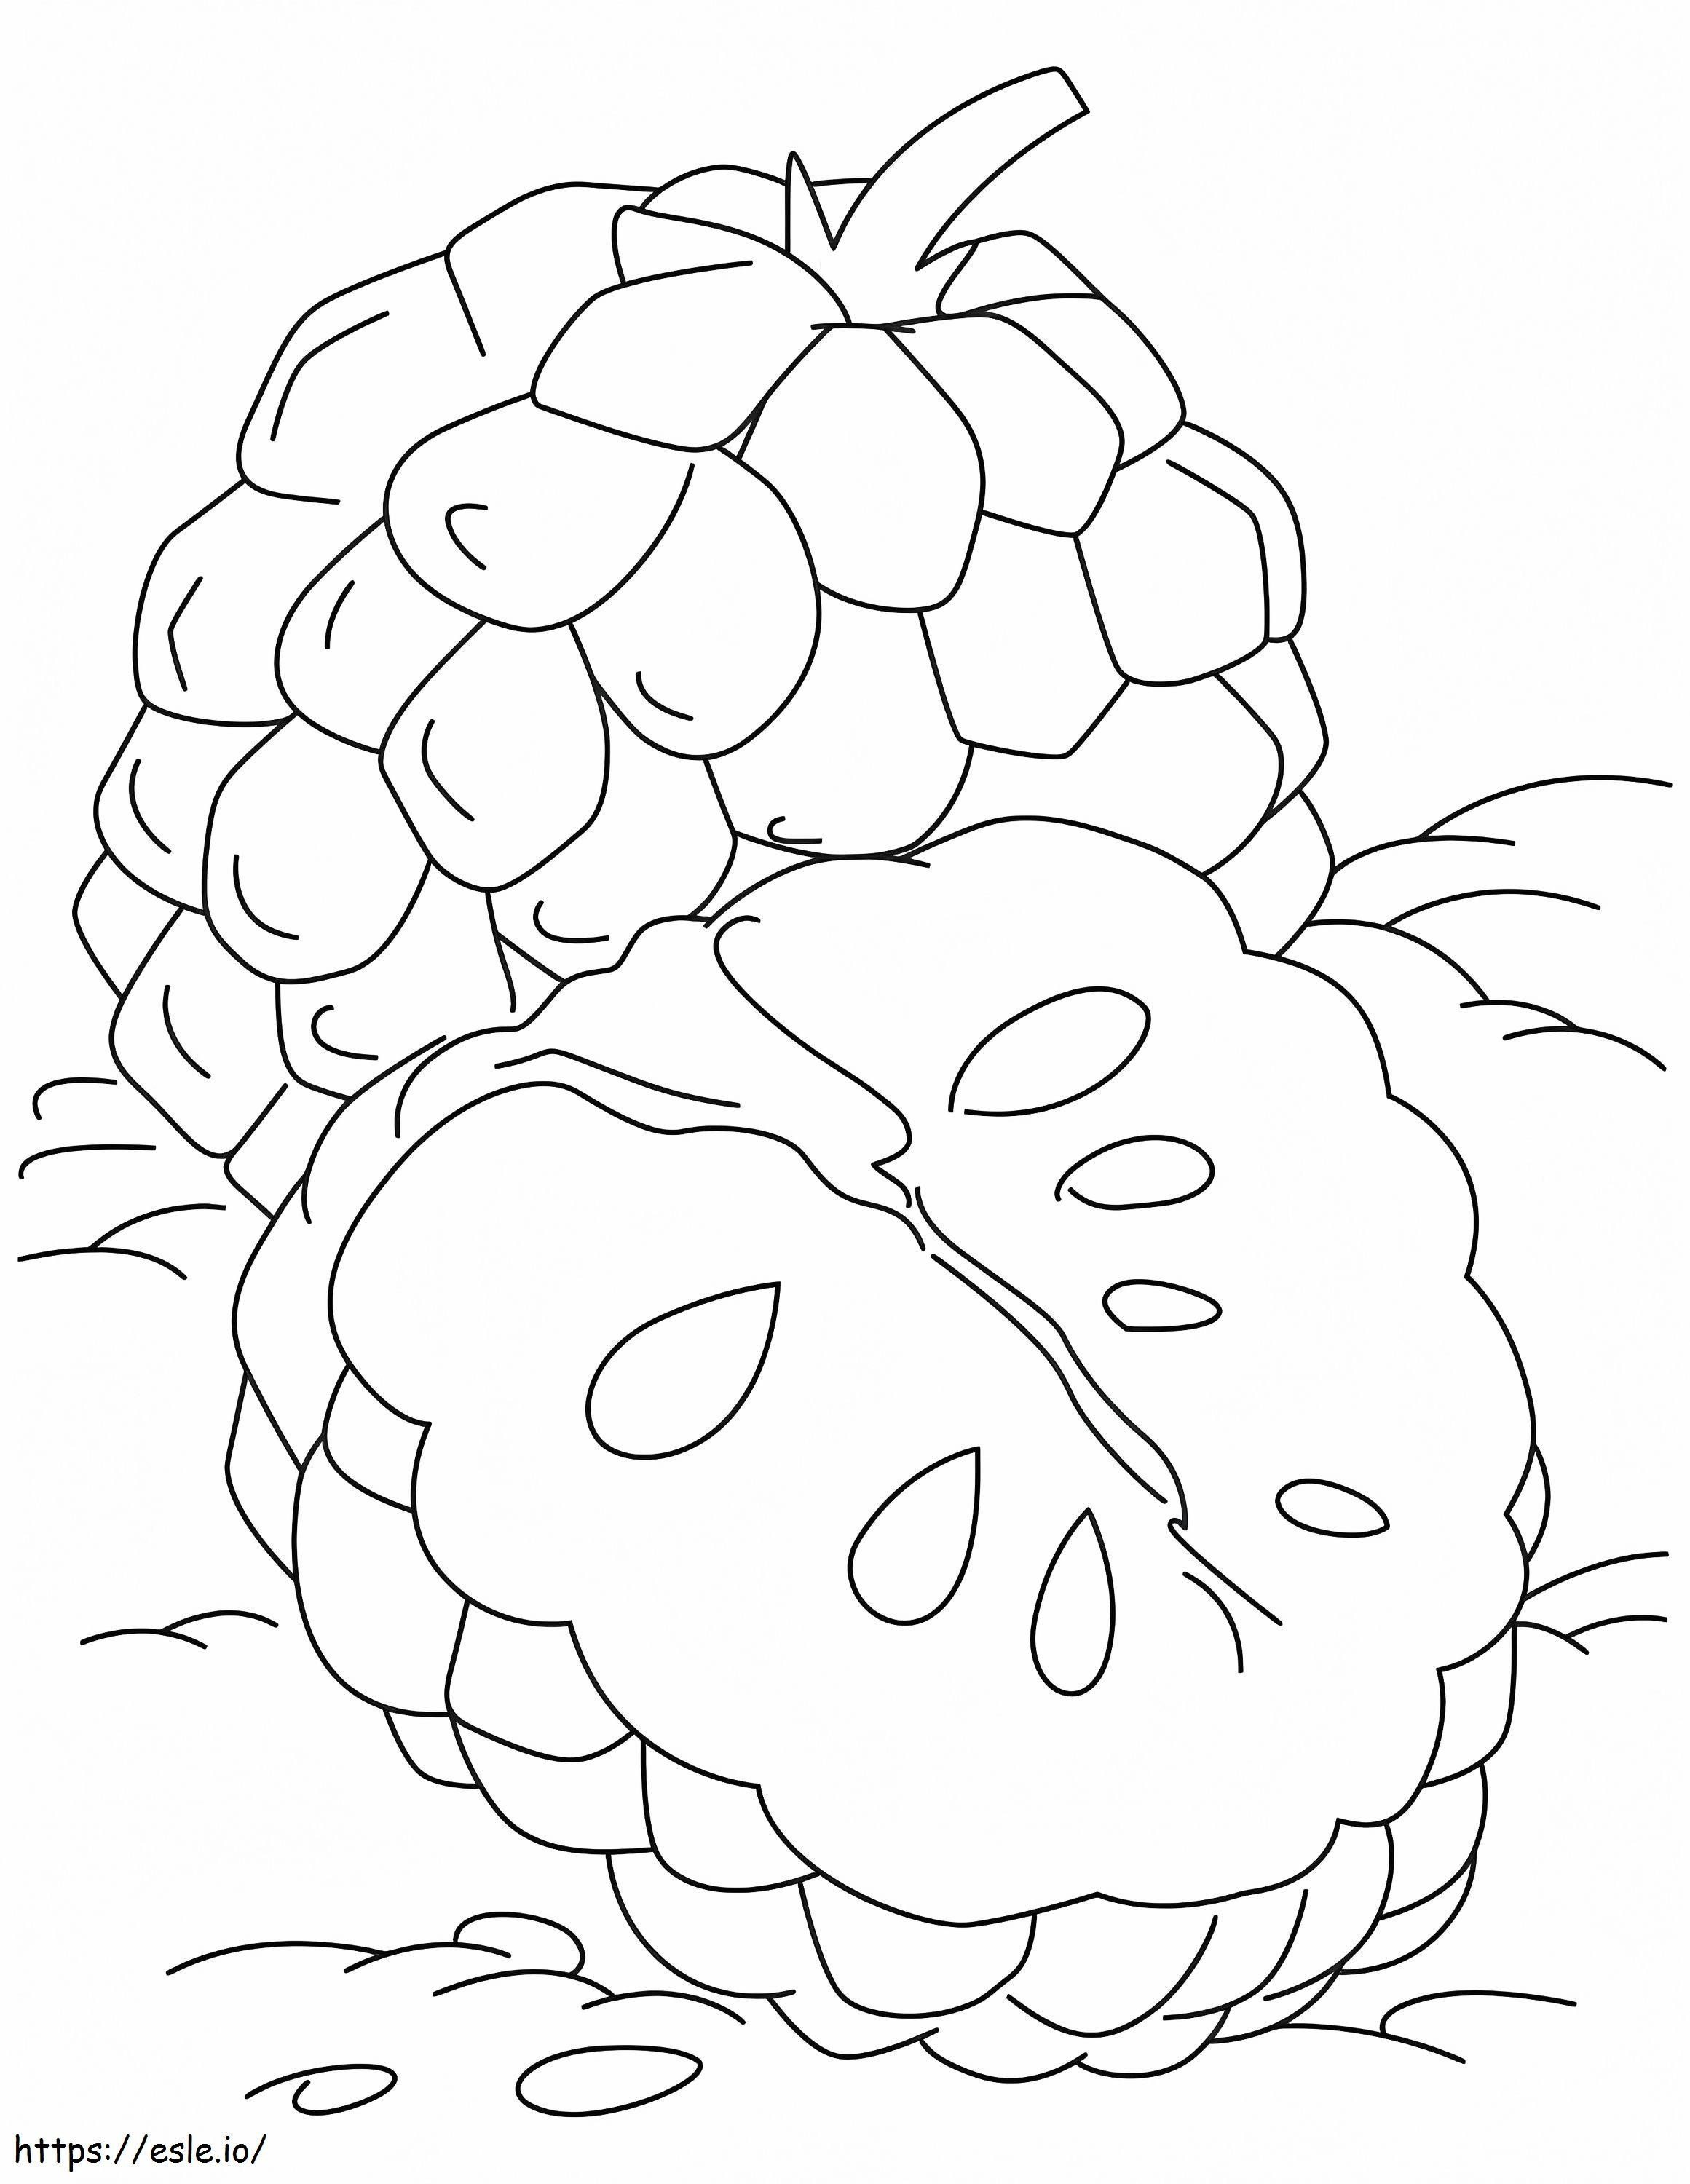 1545181358 Custard Apple Coloring 1 coloring page